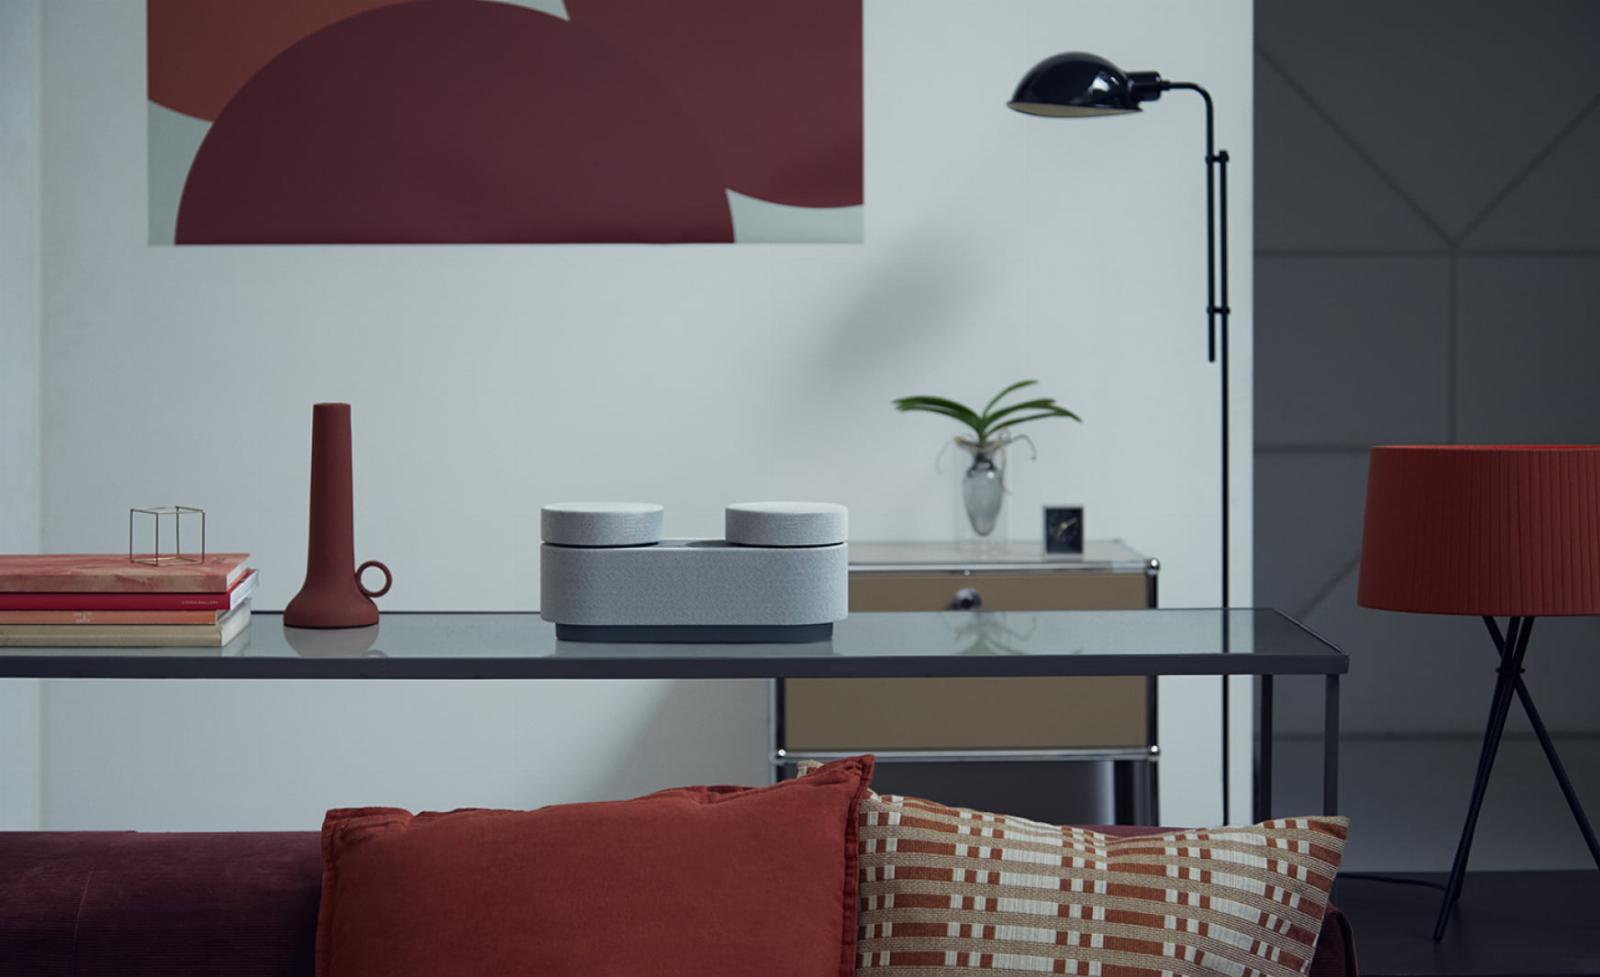 Sony’s modular speaker system is a clever and portable take on the home theater